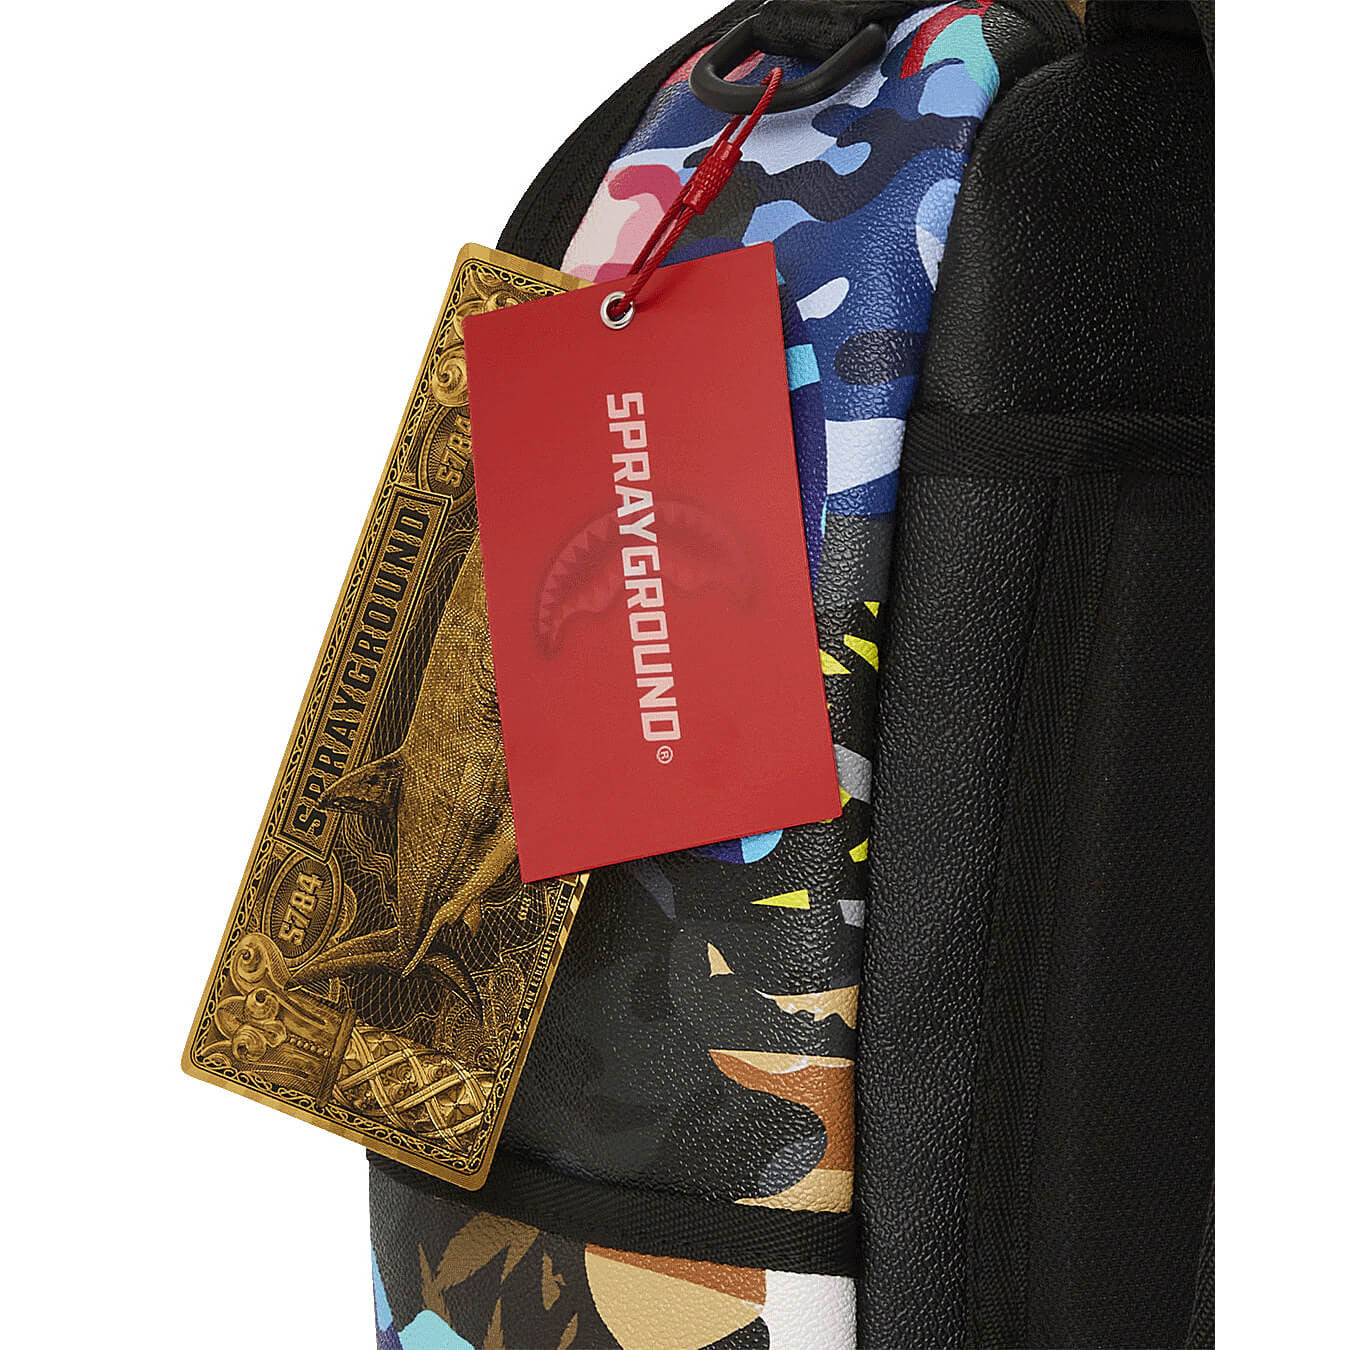 Sprayground Backpack Sliced And Diced Camo Backpack Blue Multi